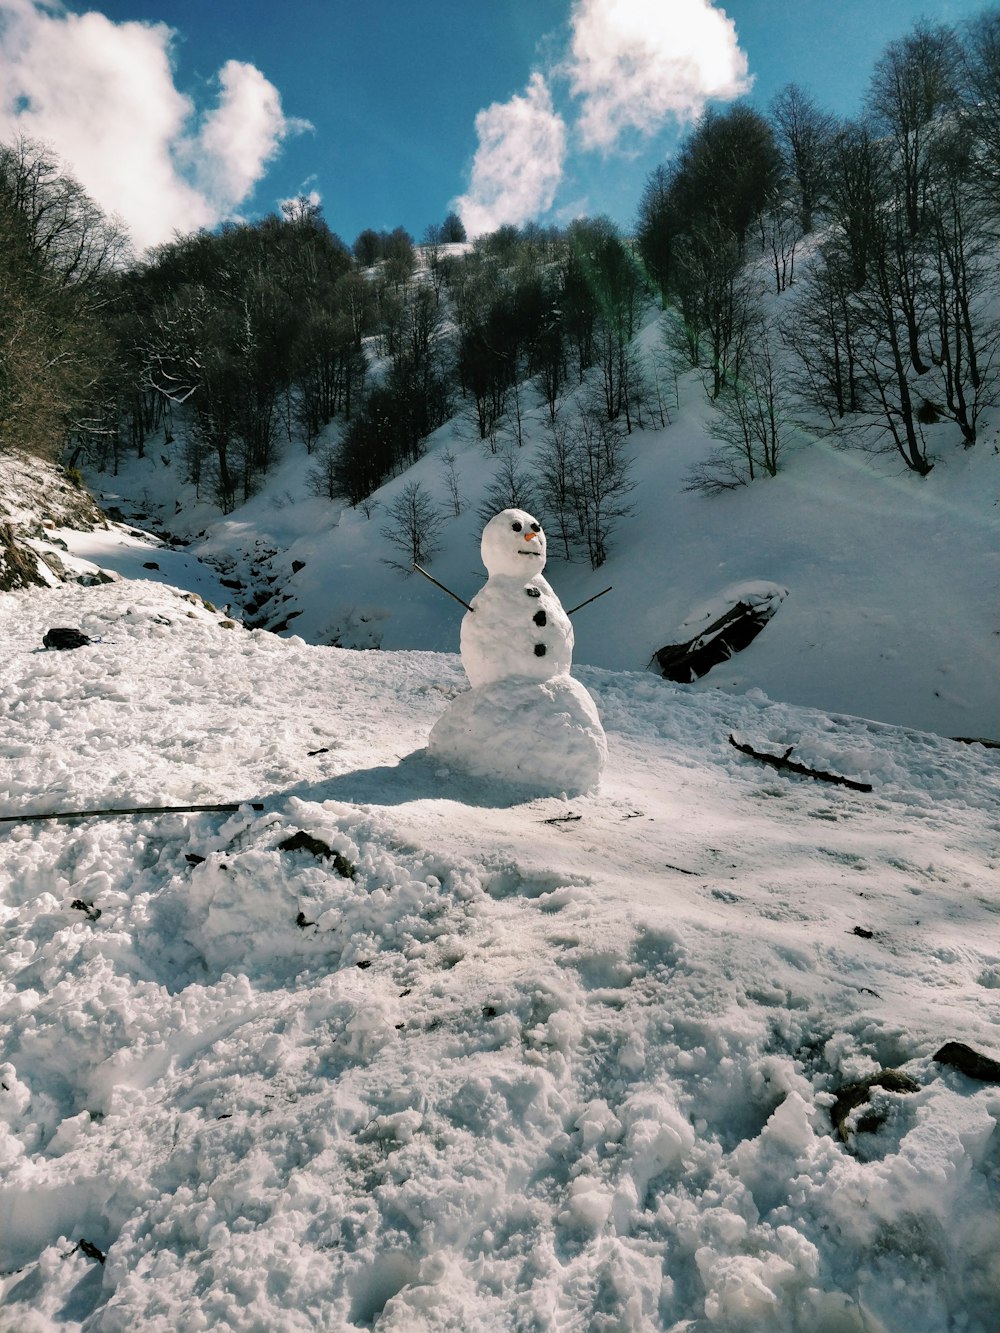 snowman on snow covered ground during daytime